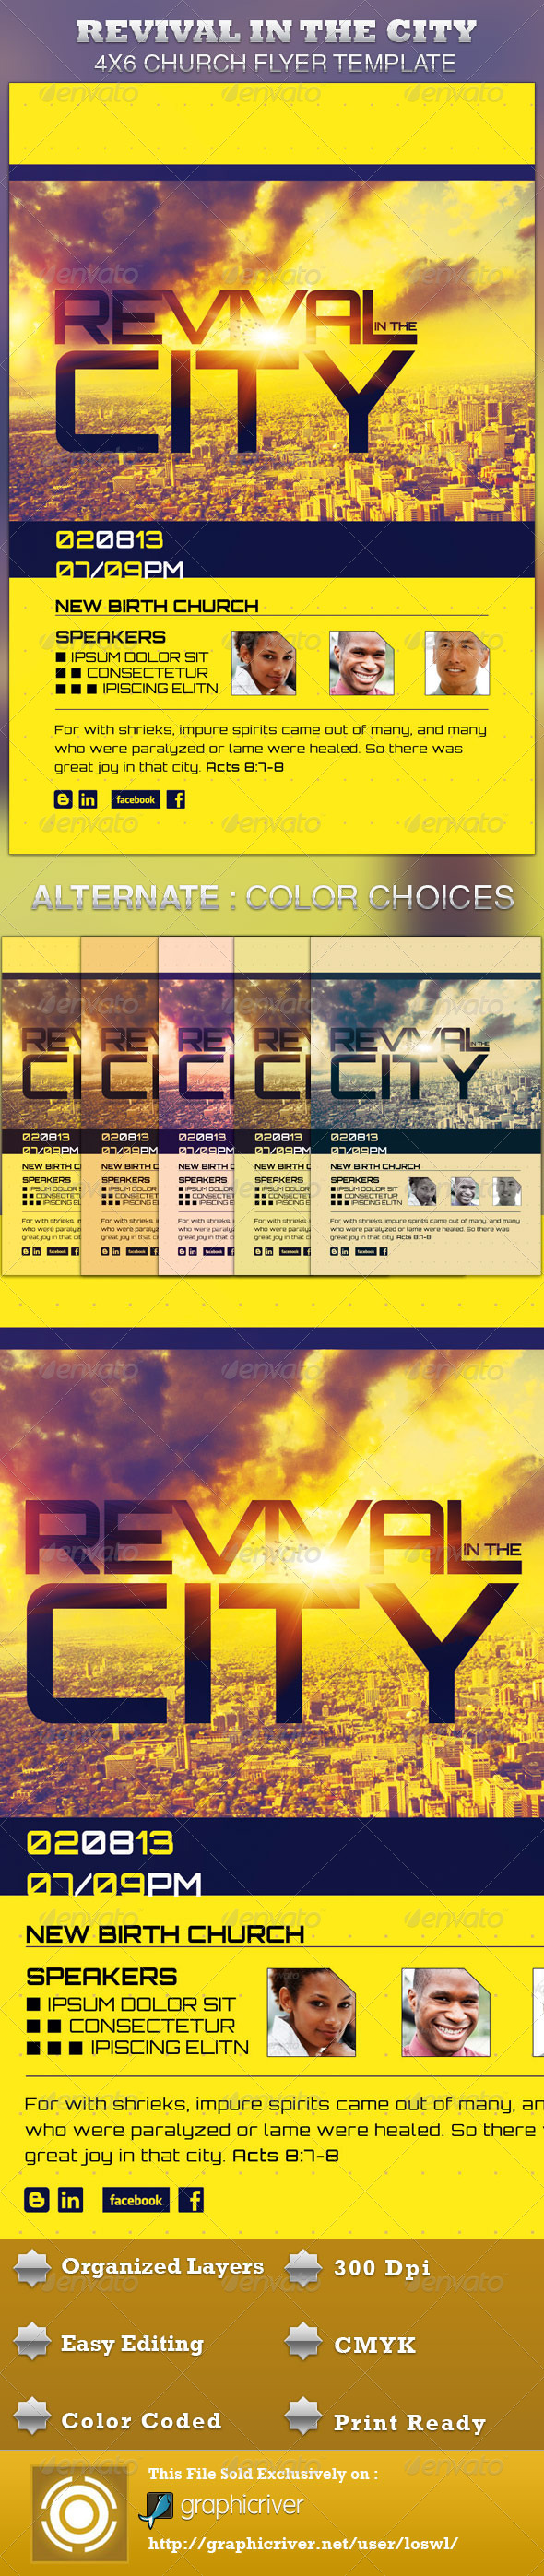 Revival in the City Church Flyer Template